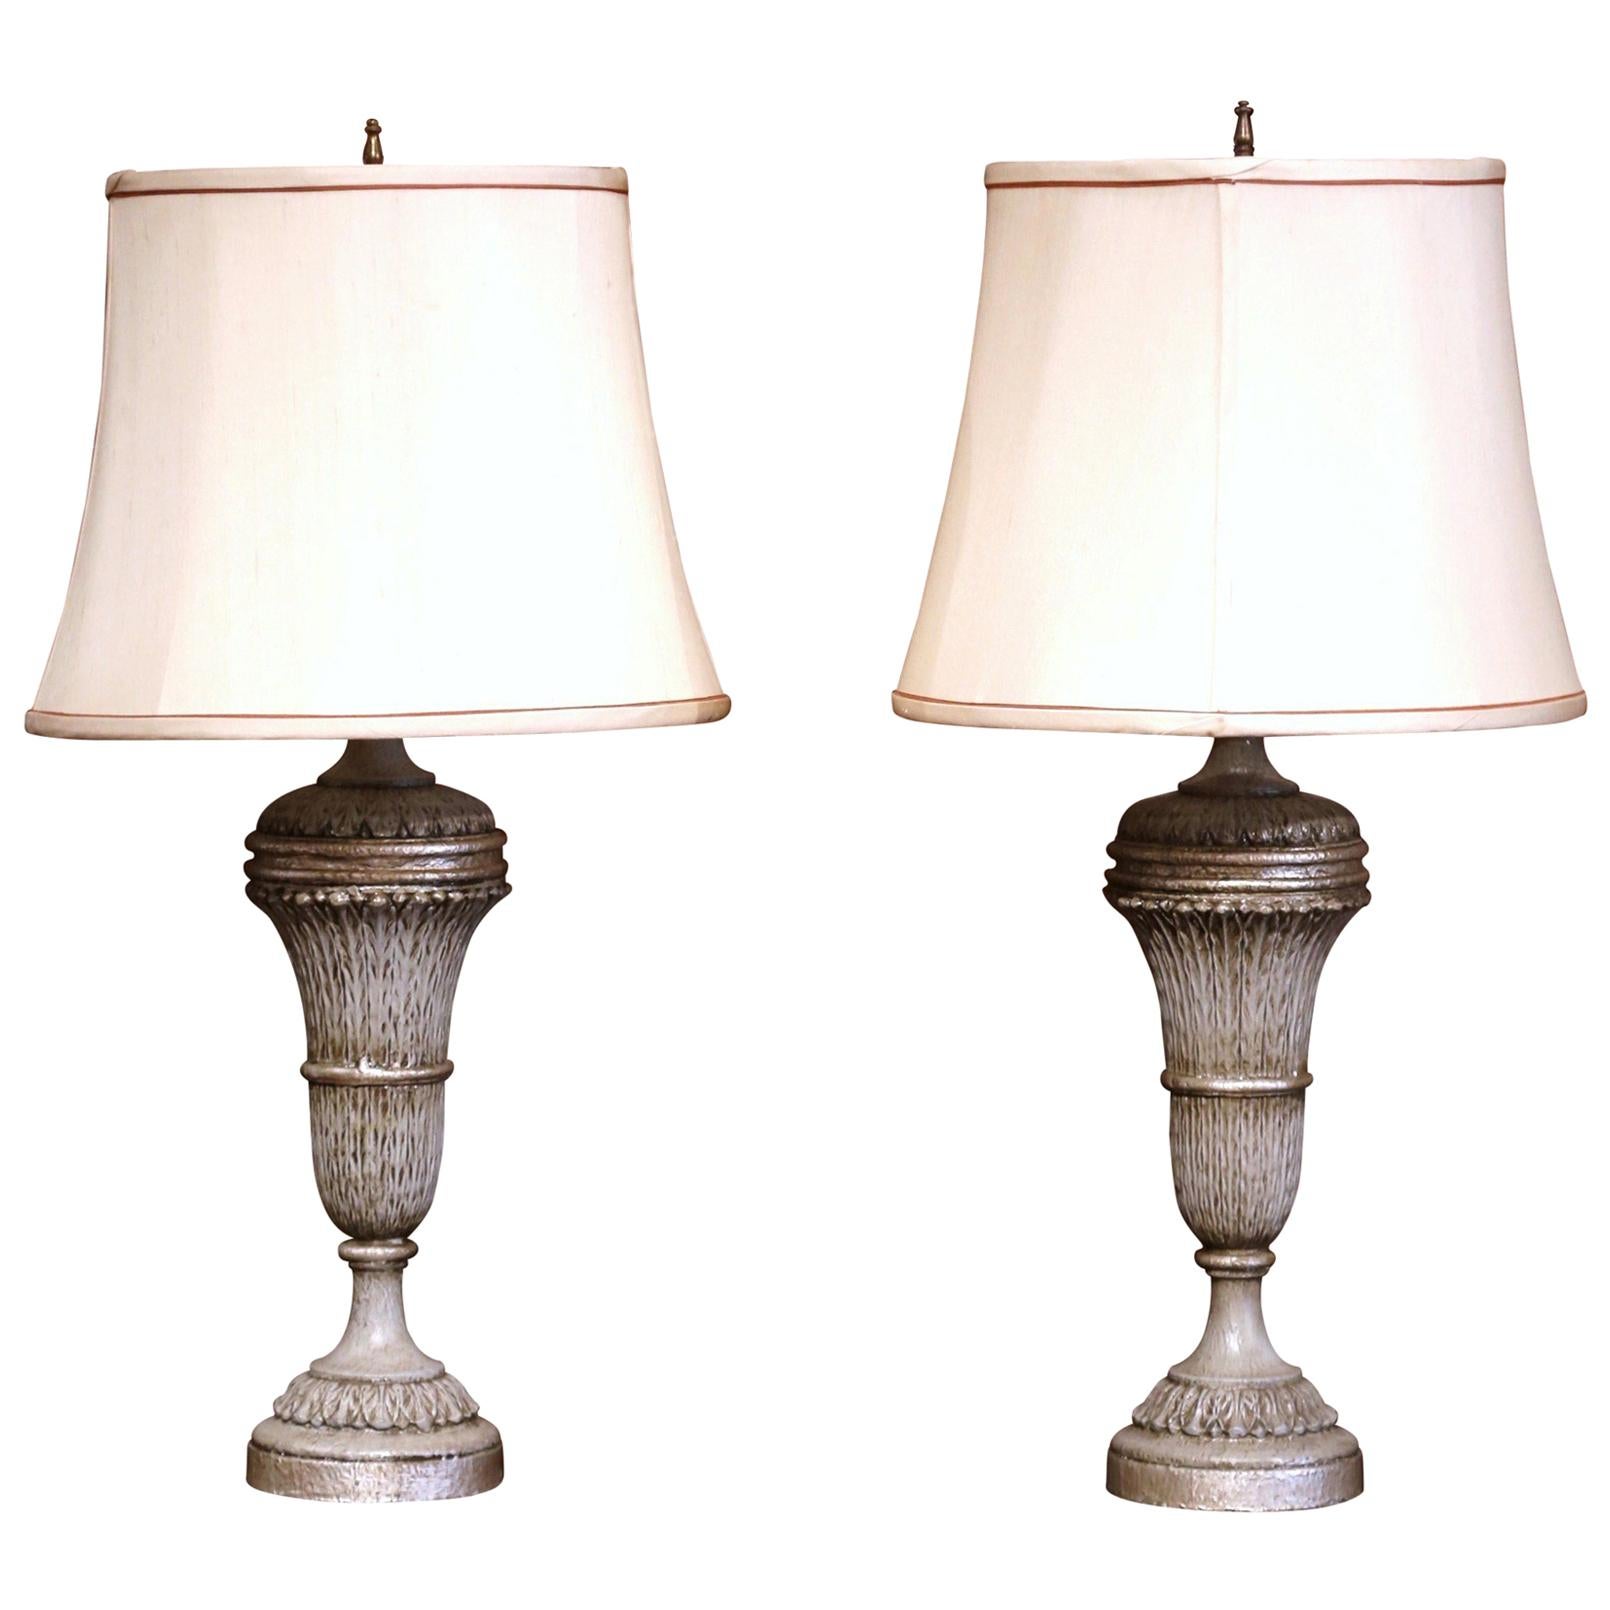 Pair of 19th Century Carved Painted Table Lamps with Custom Shades